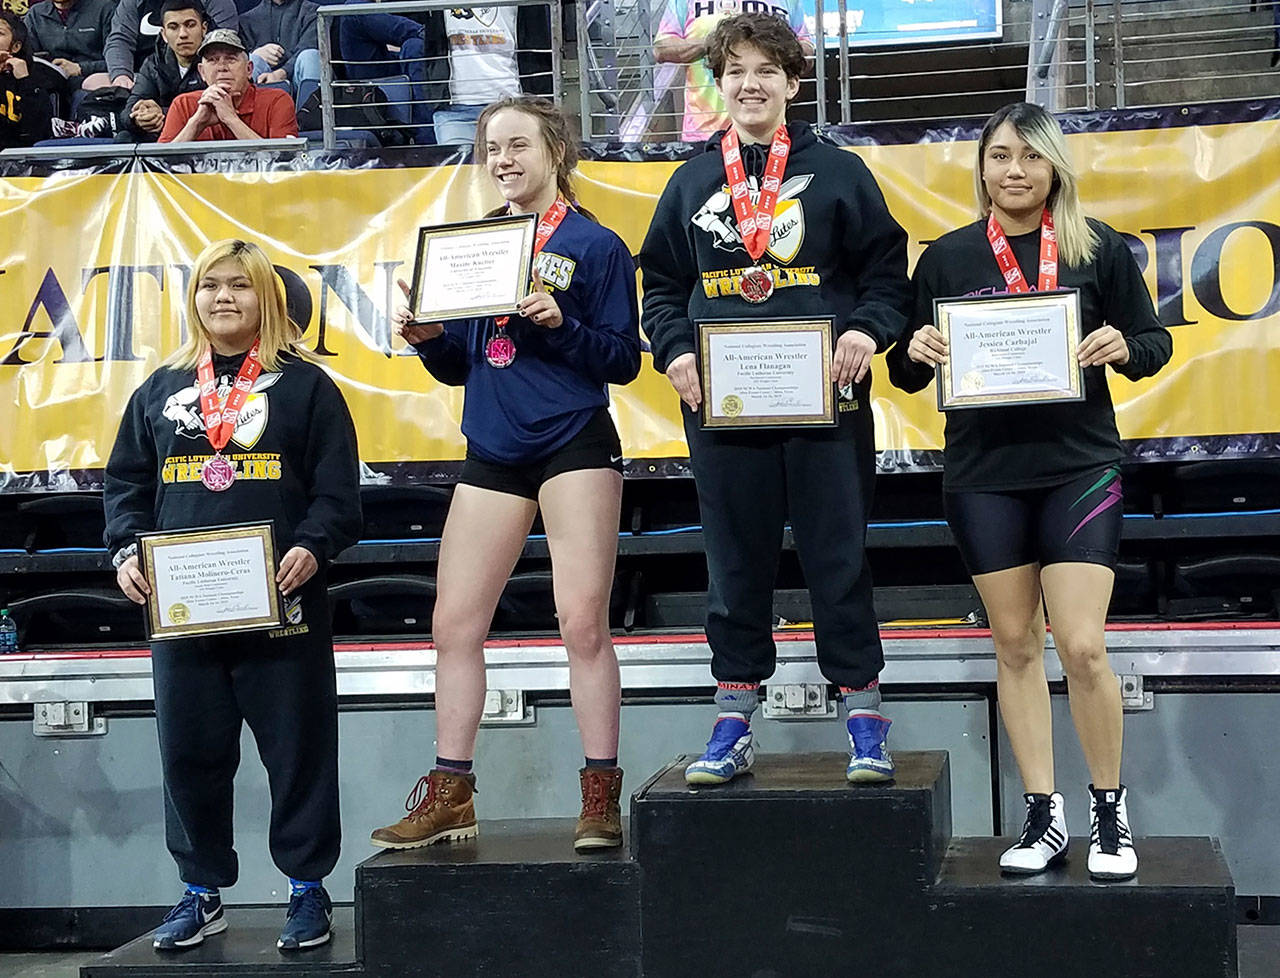 Following an athletic career at White River High, Tatiana Molinero-Ceras headed to Pacific Lutheran University. In her first year of collegiate wrestling, she placed fourth at the NCWA national championships. At left, she stands on the podium in Texas with the top-three placers; each was accorded All-American status. Submitted photo